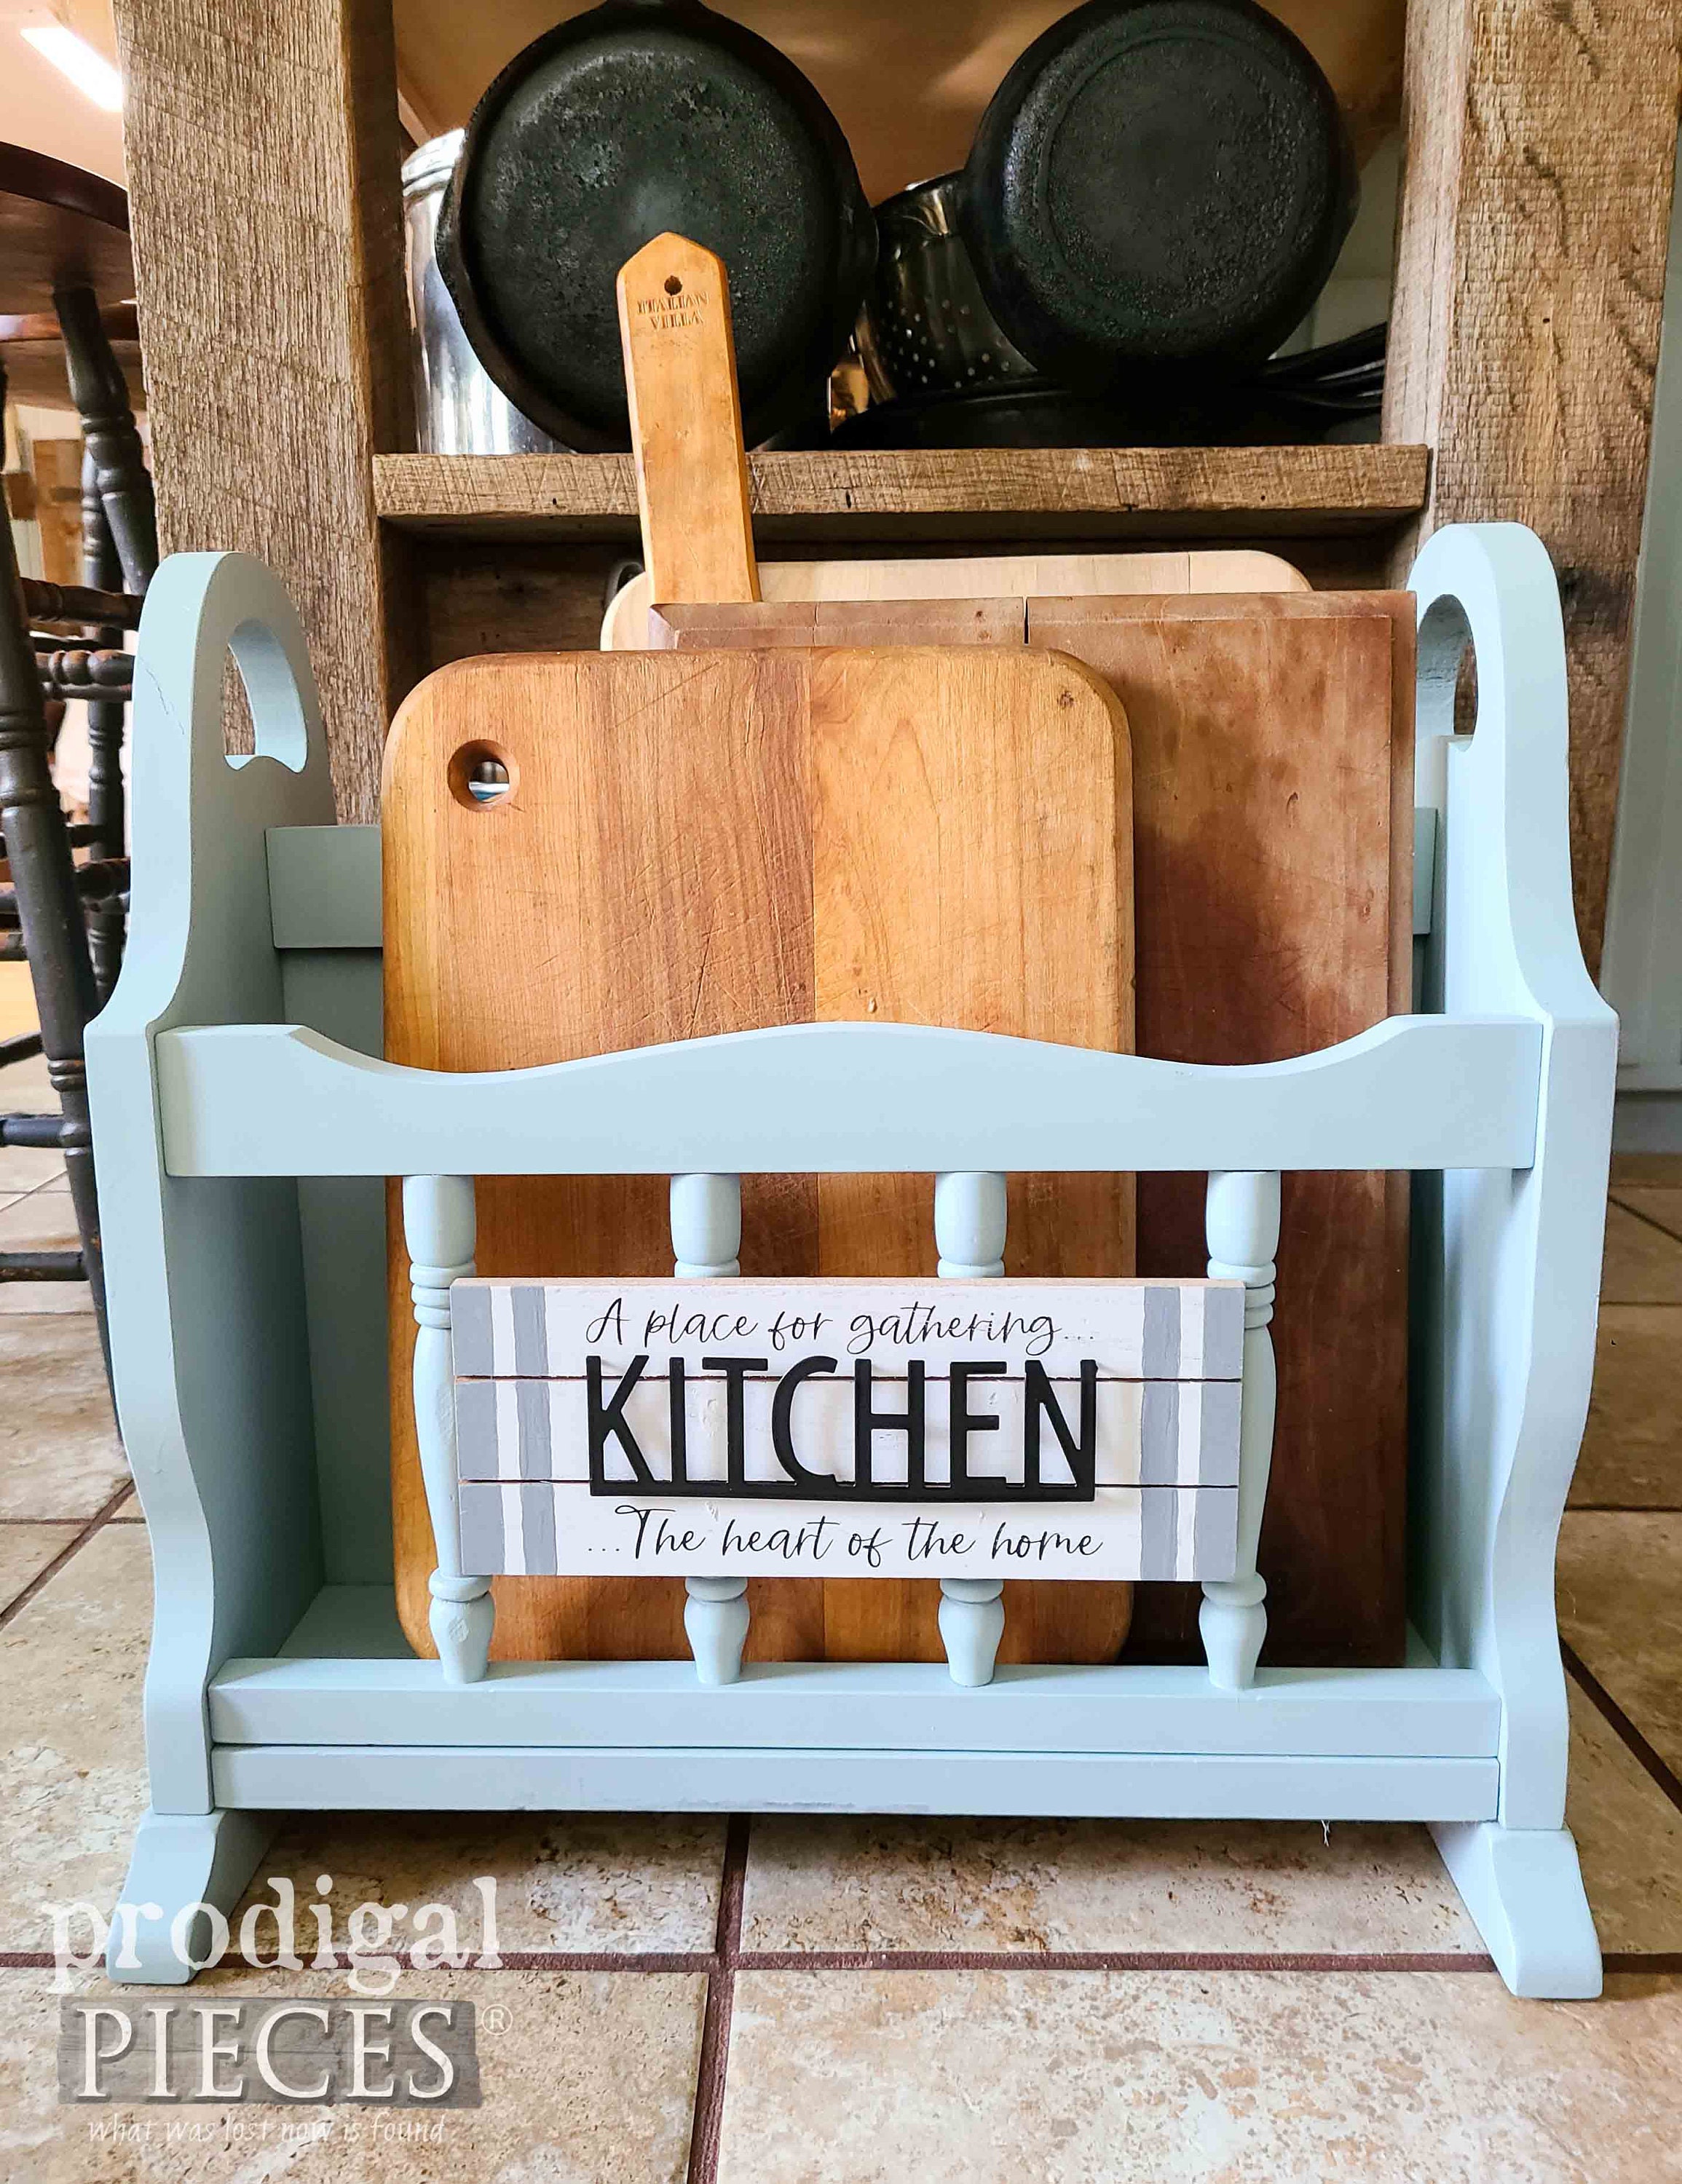 Upcycled Picnic Baskets for Home Decor - Prodigal Pieces